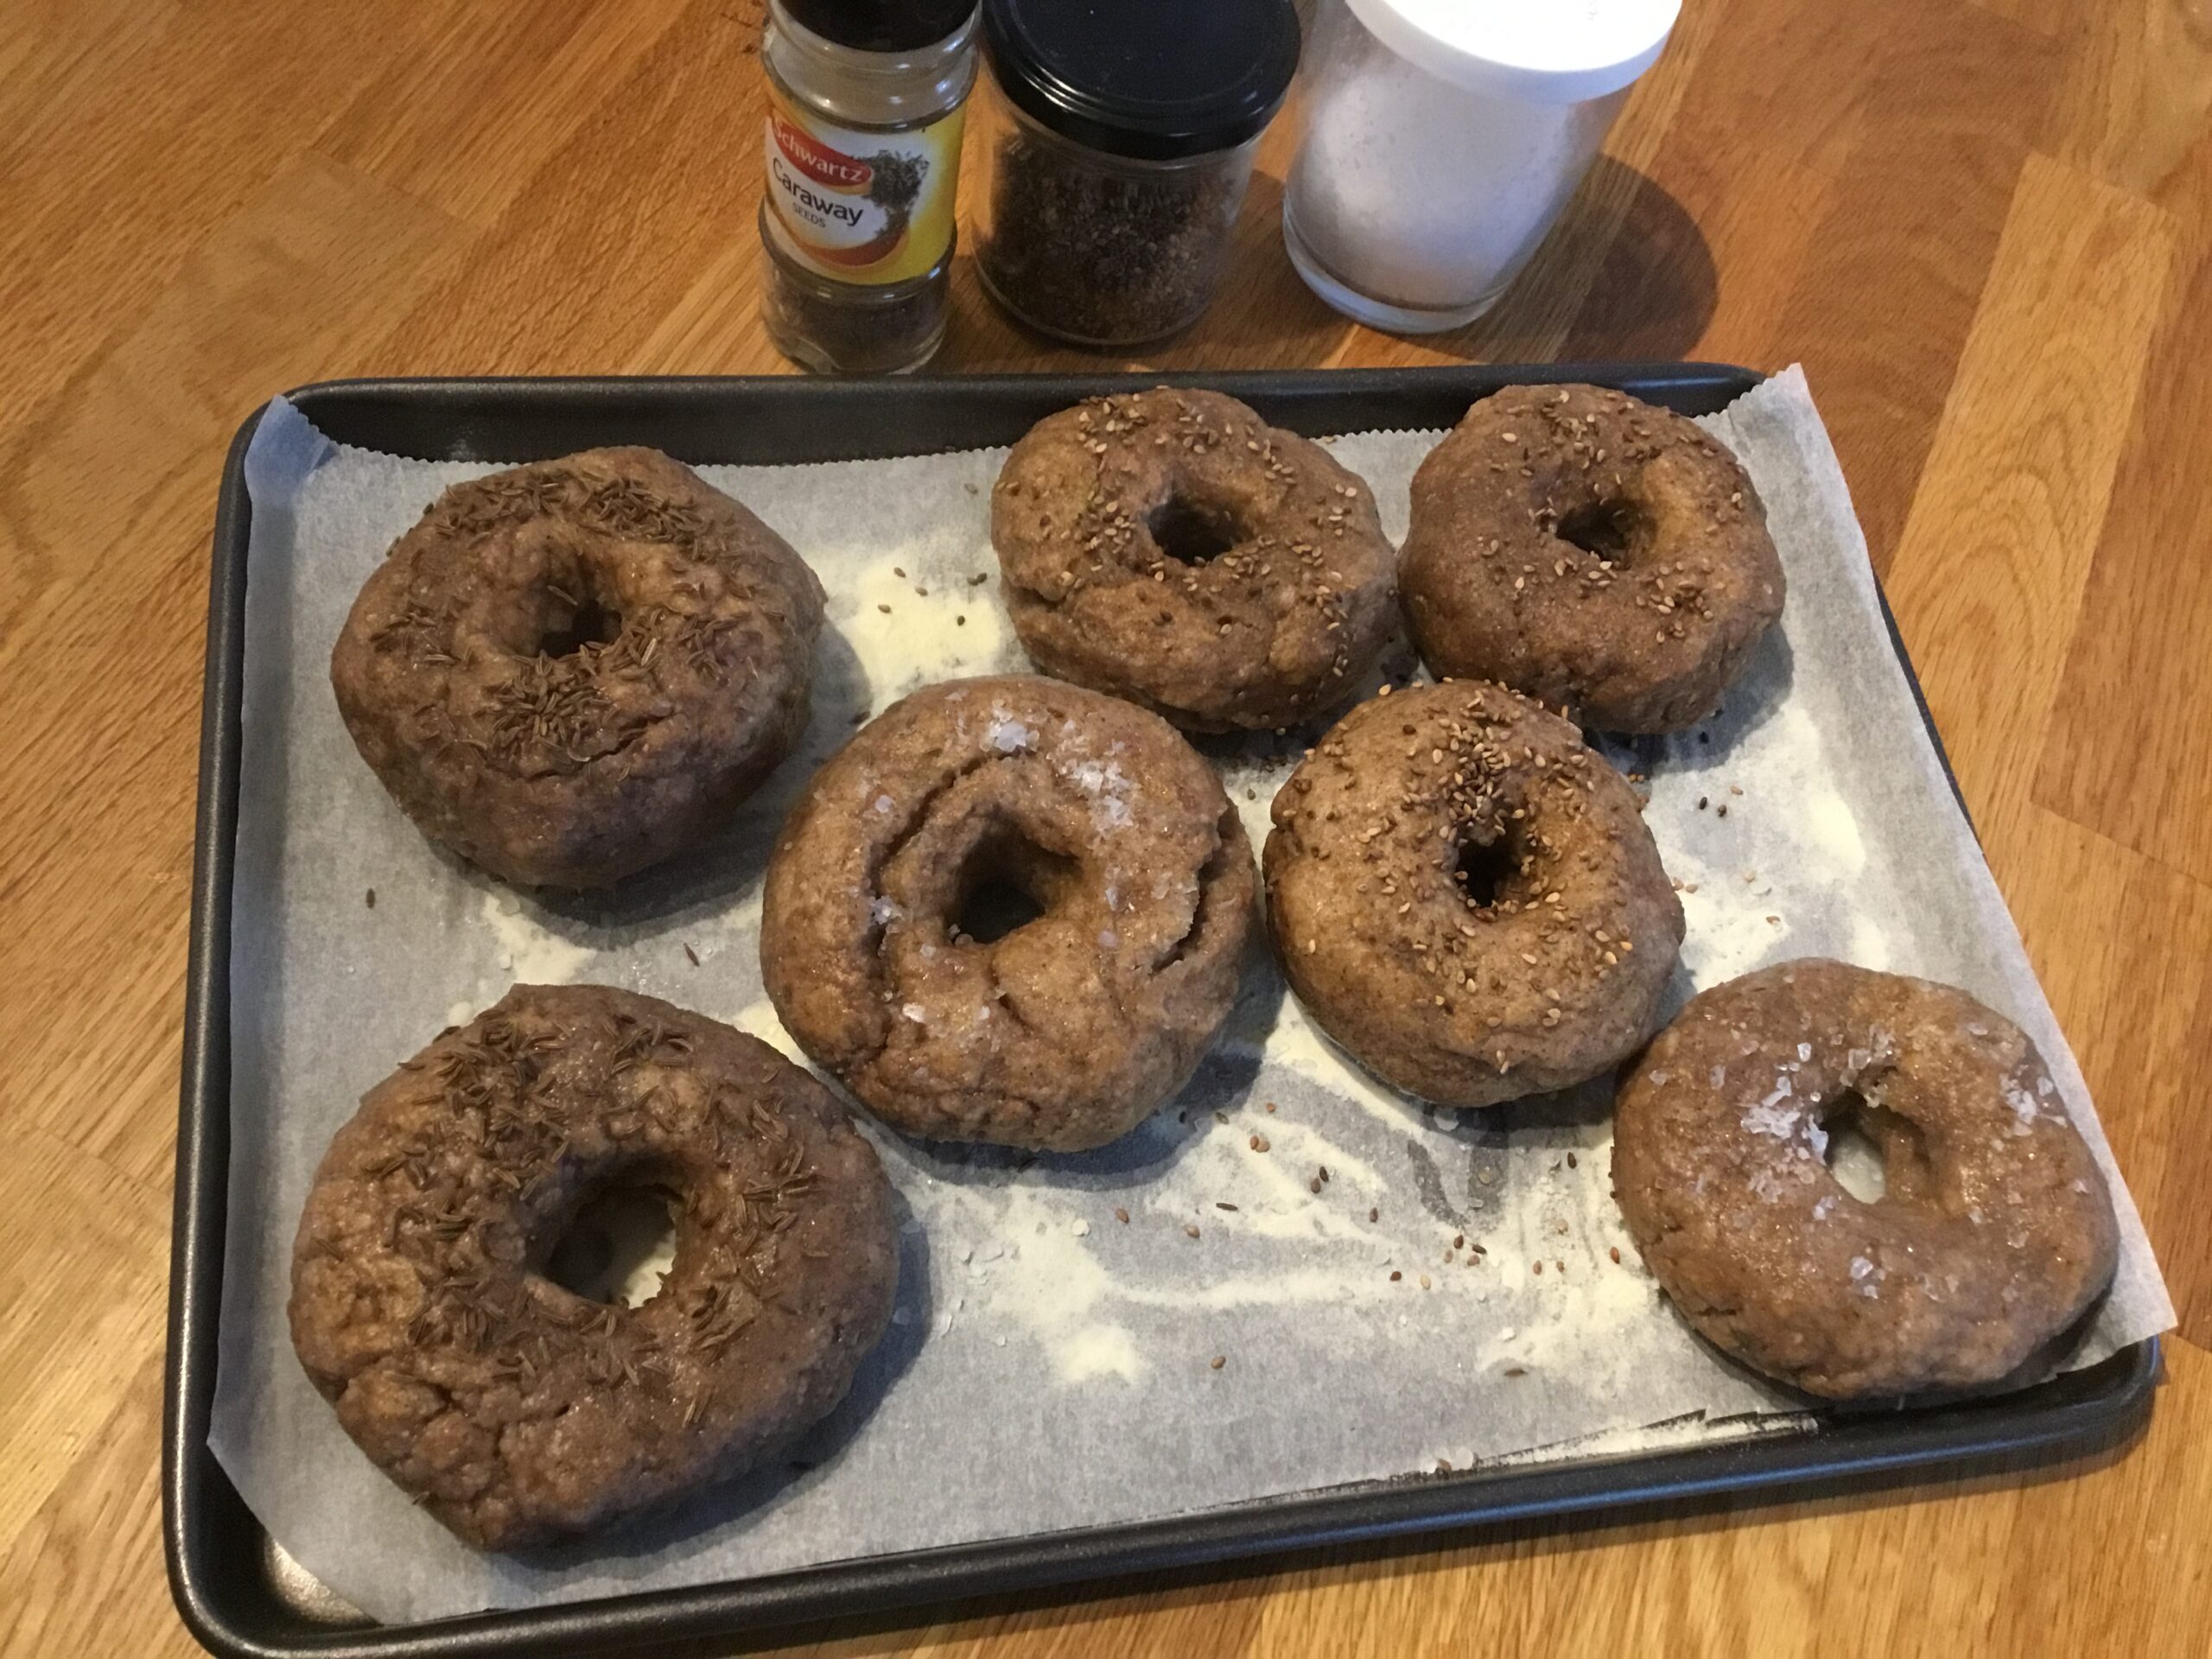 Bagels on the baking tray